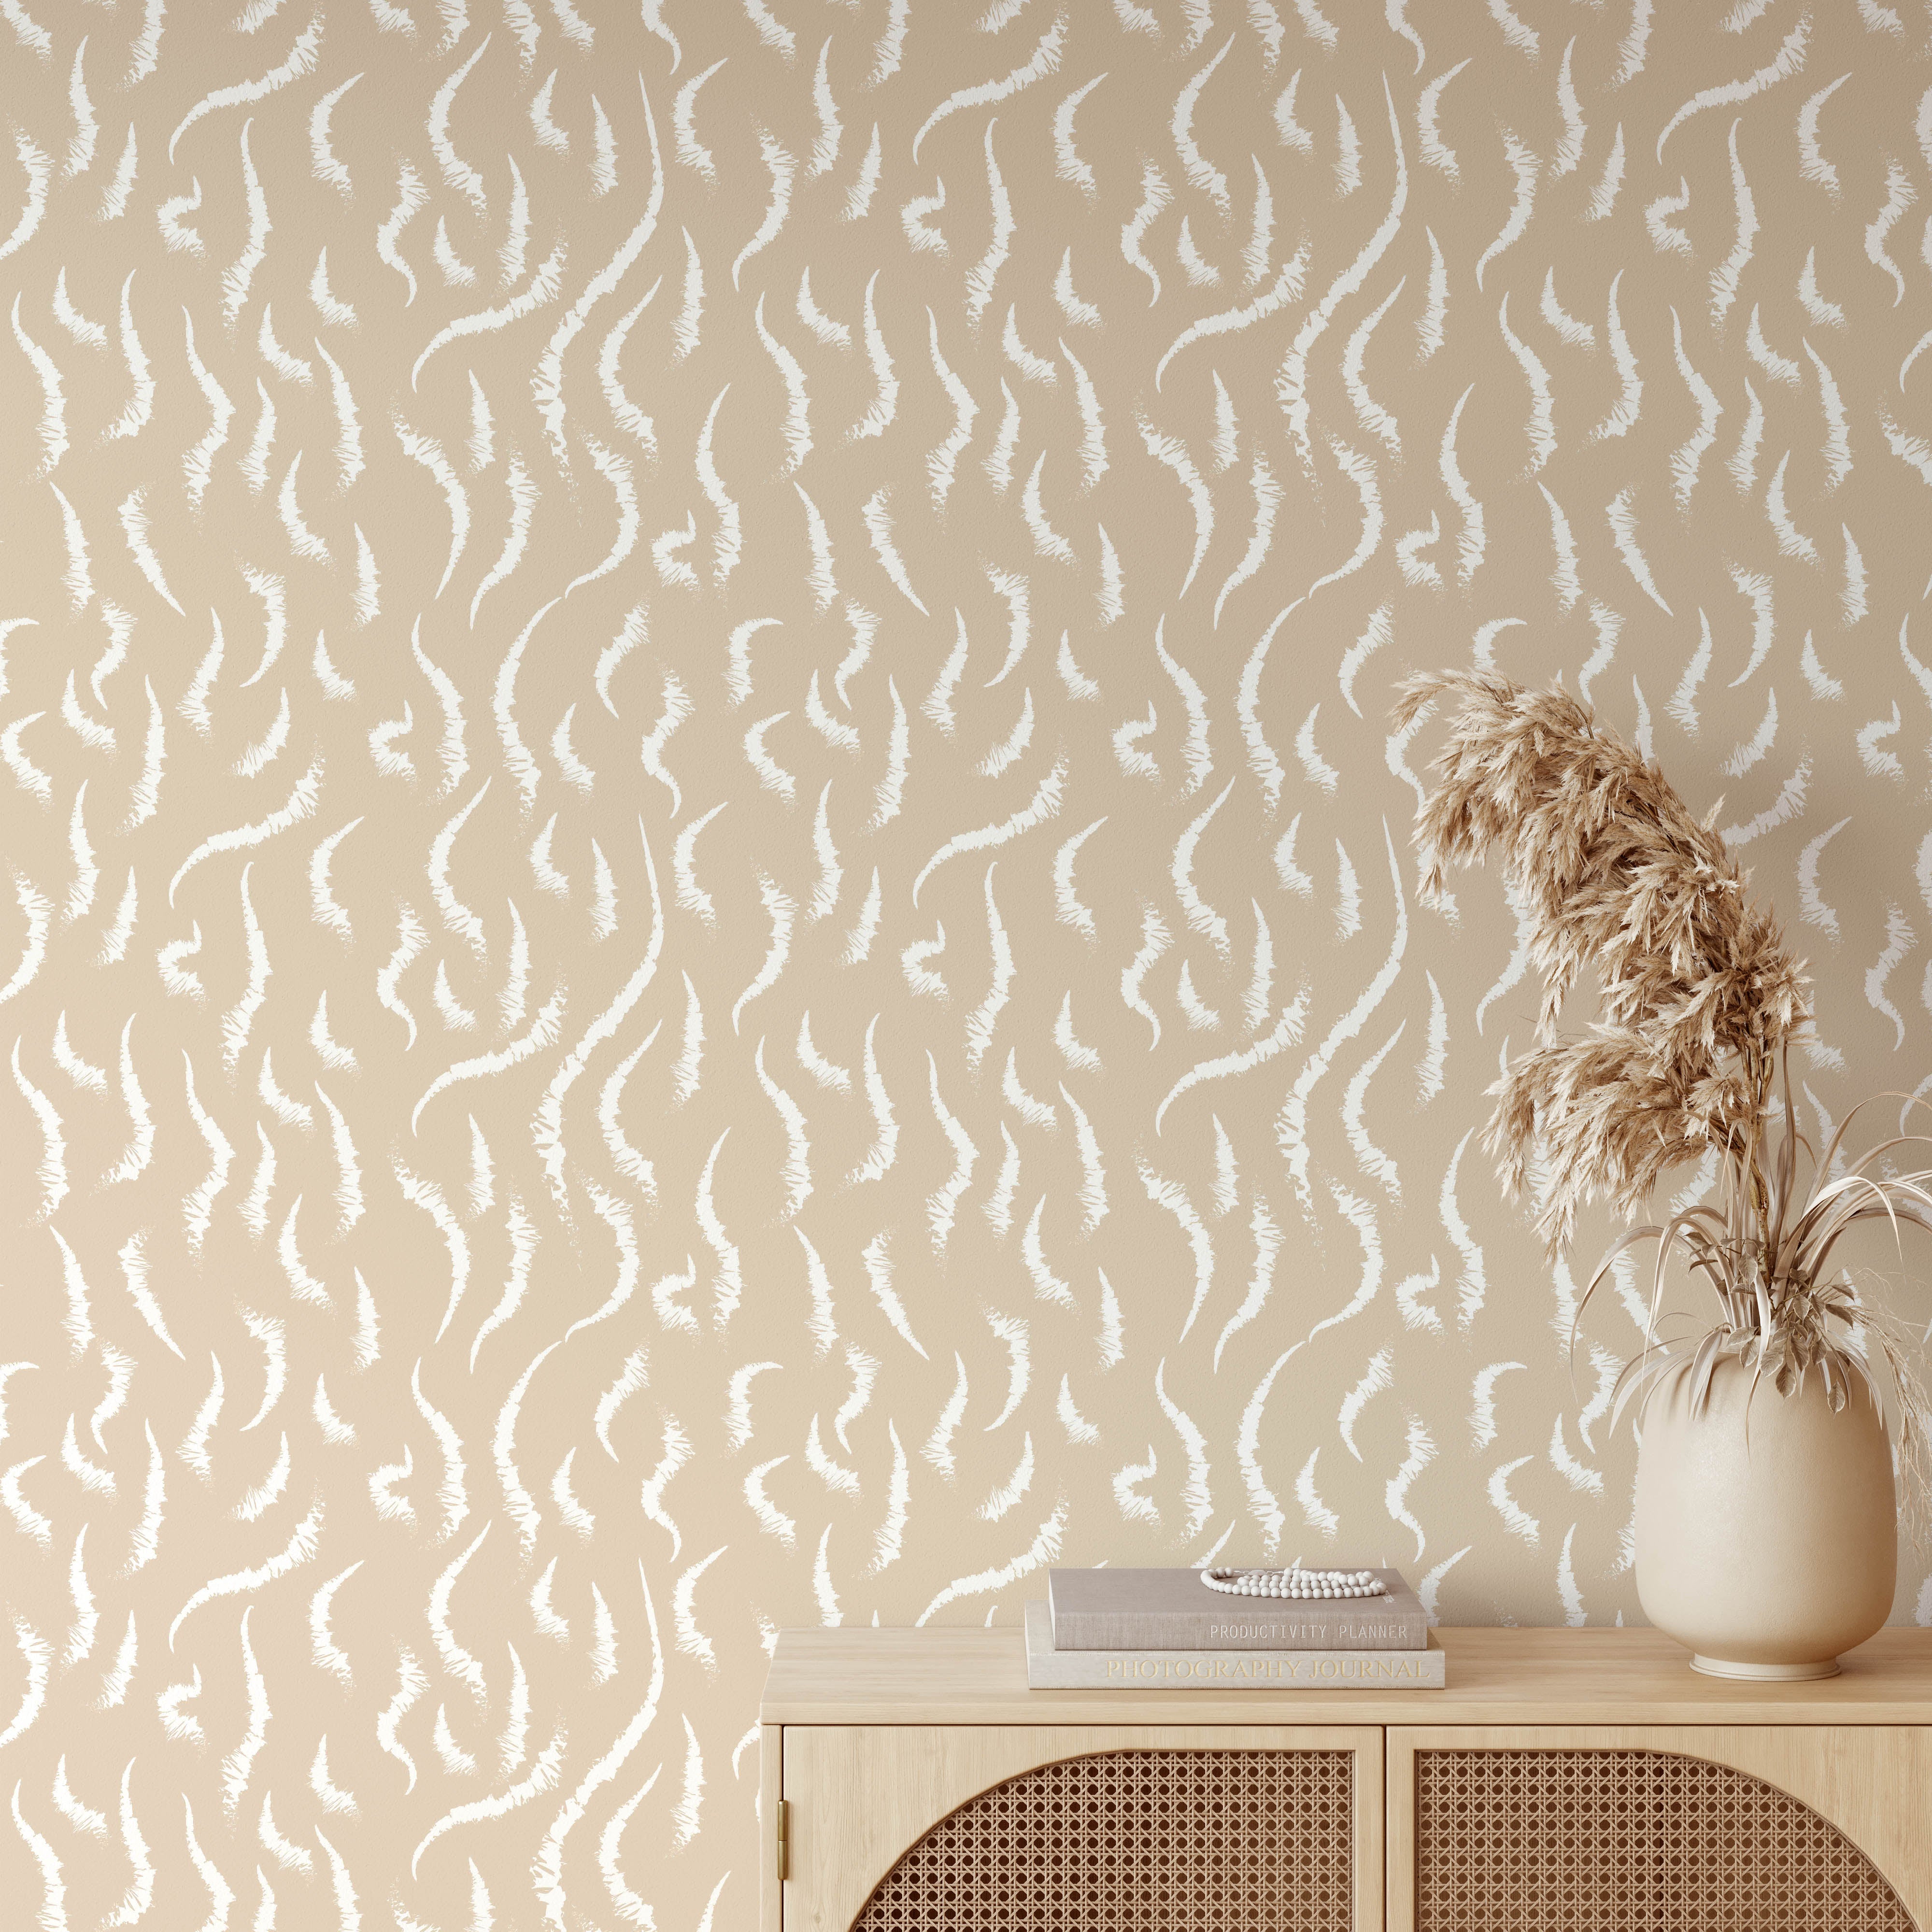 Gold Cream Celestial Contact Paper Peel and Stick Wallpaper